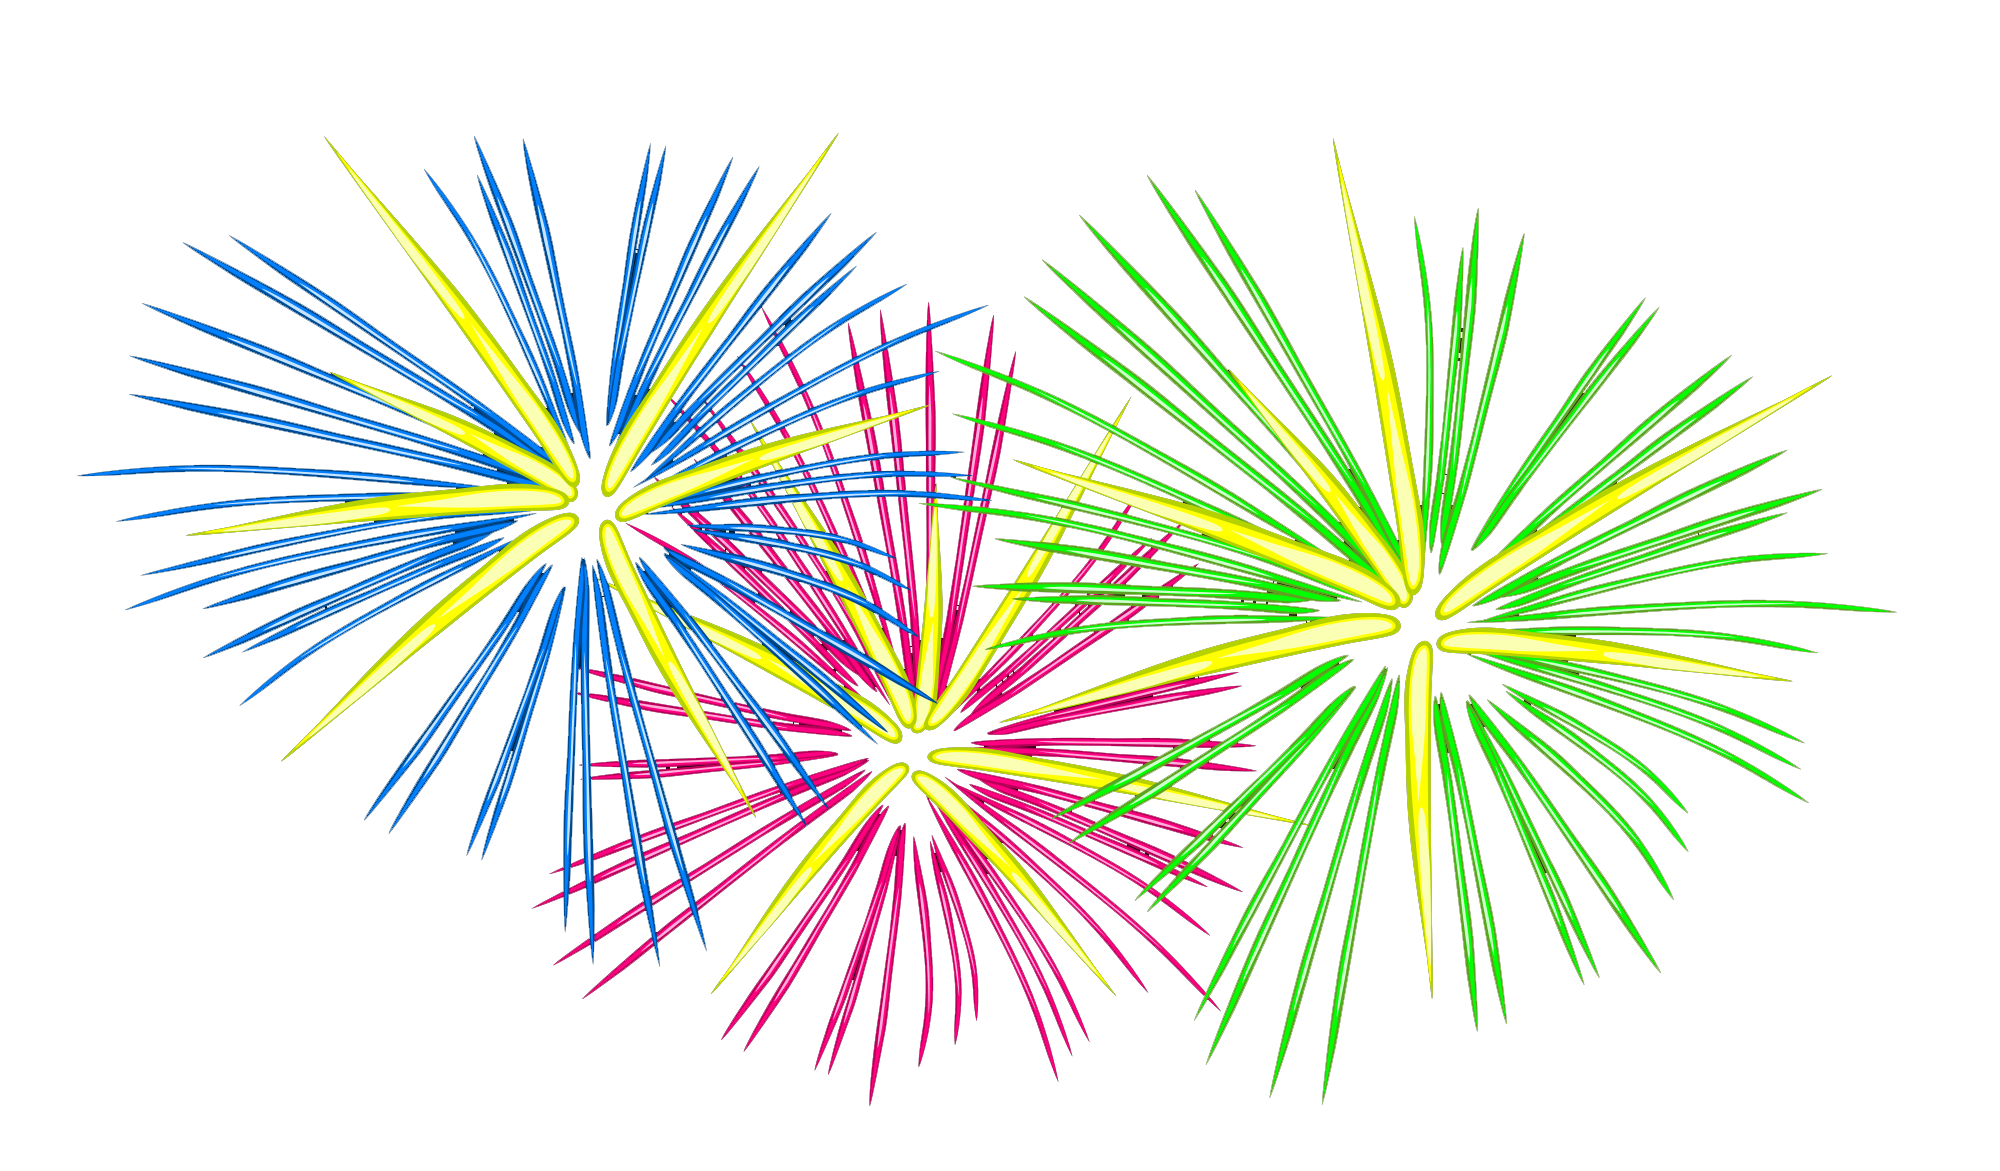 Drawn Fireworks Animated #1 - Animated Fireworks, Transparent background PNG HD thumbnail